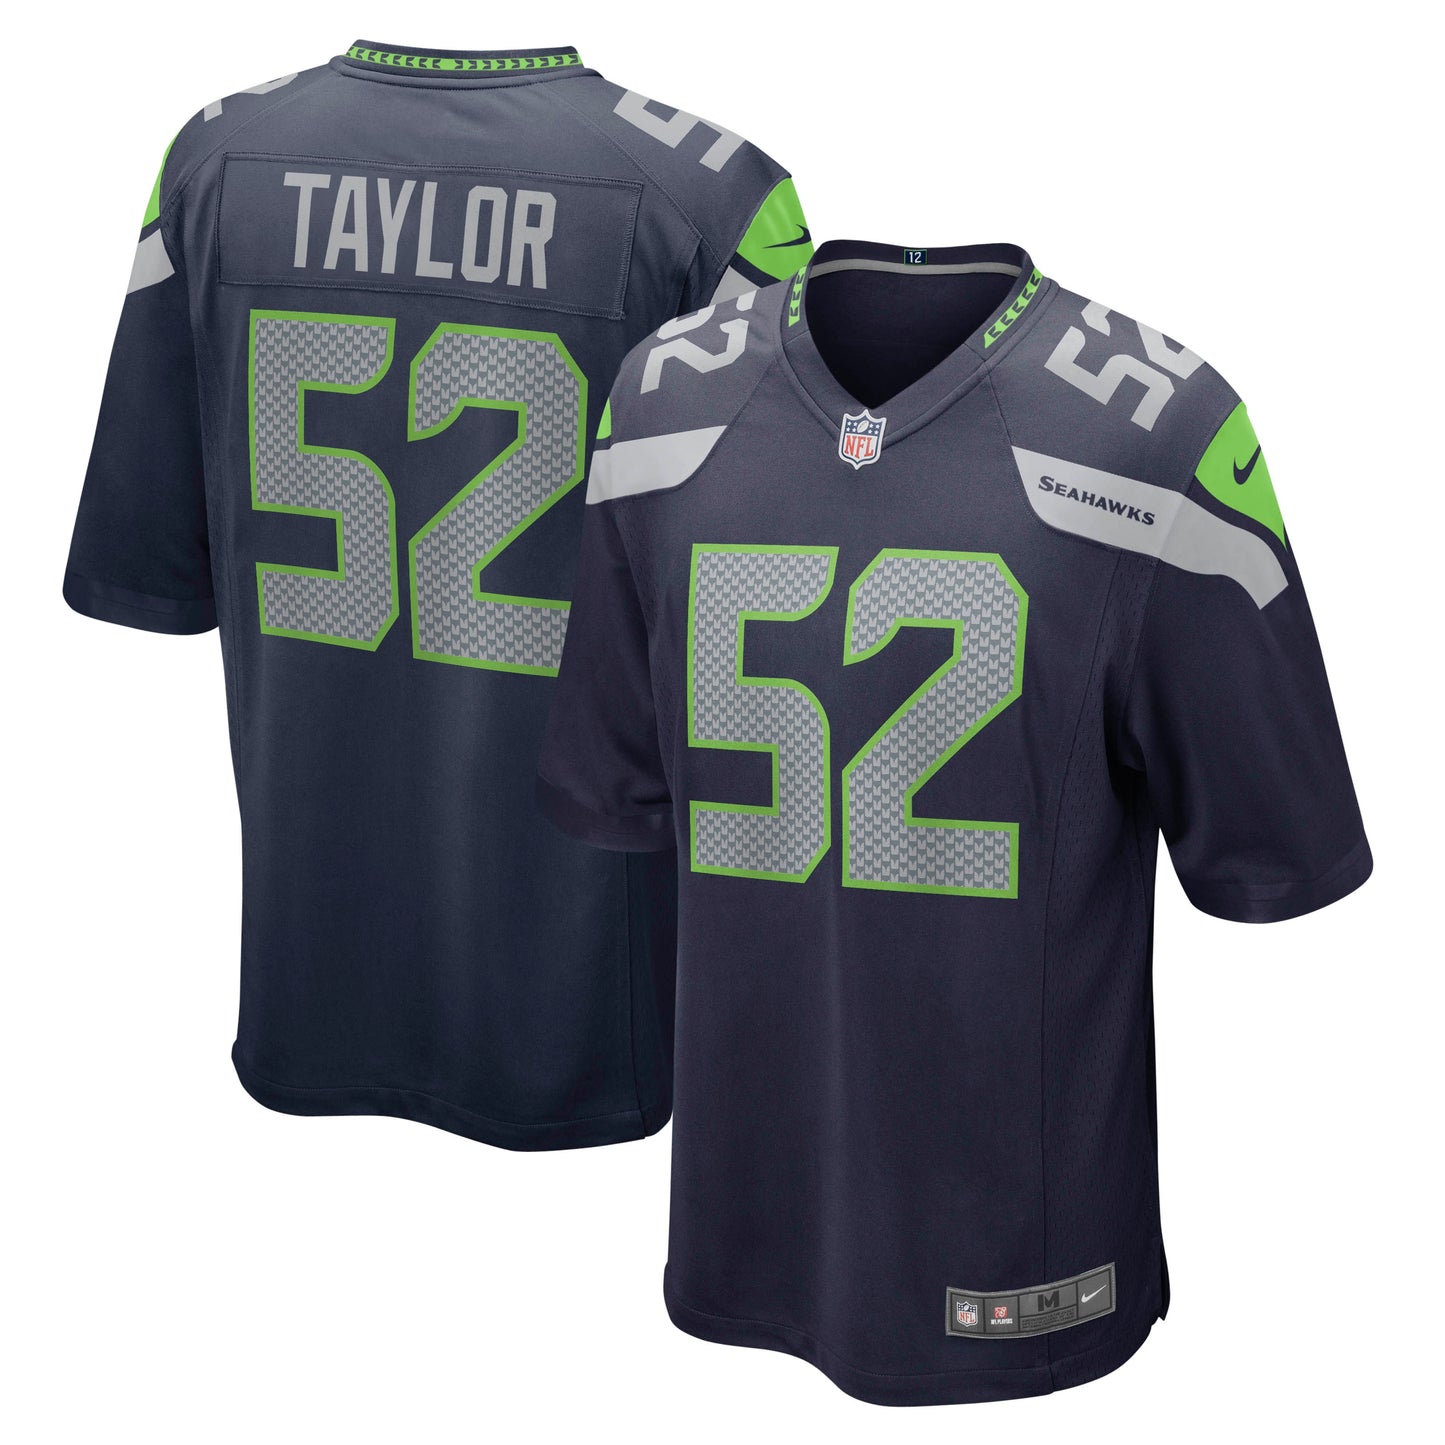 Darrell Taylor Seattle Seahawks Nike Game Jersey - College Navy